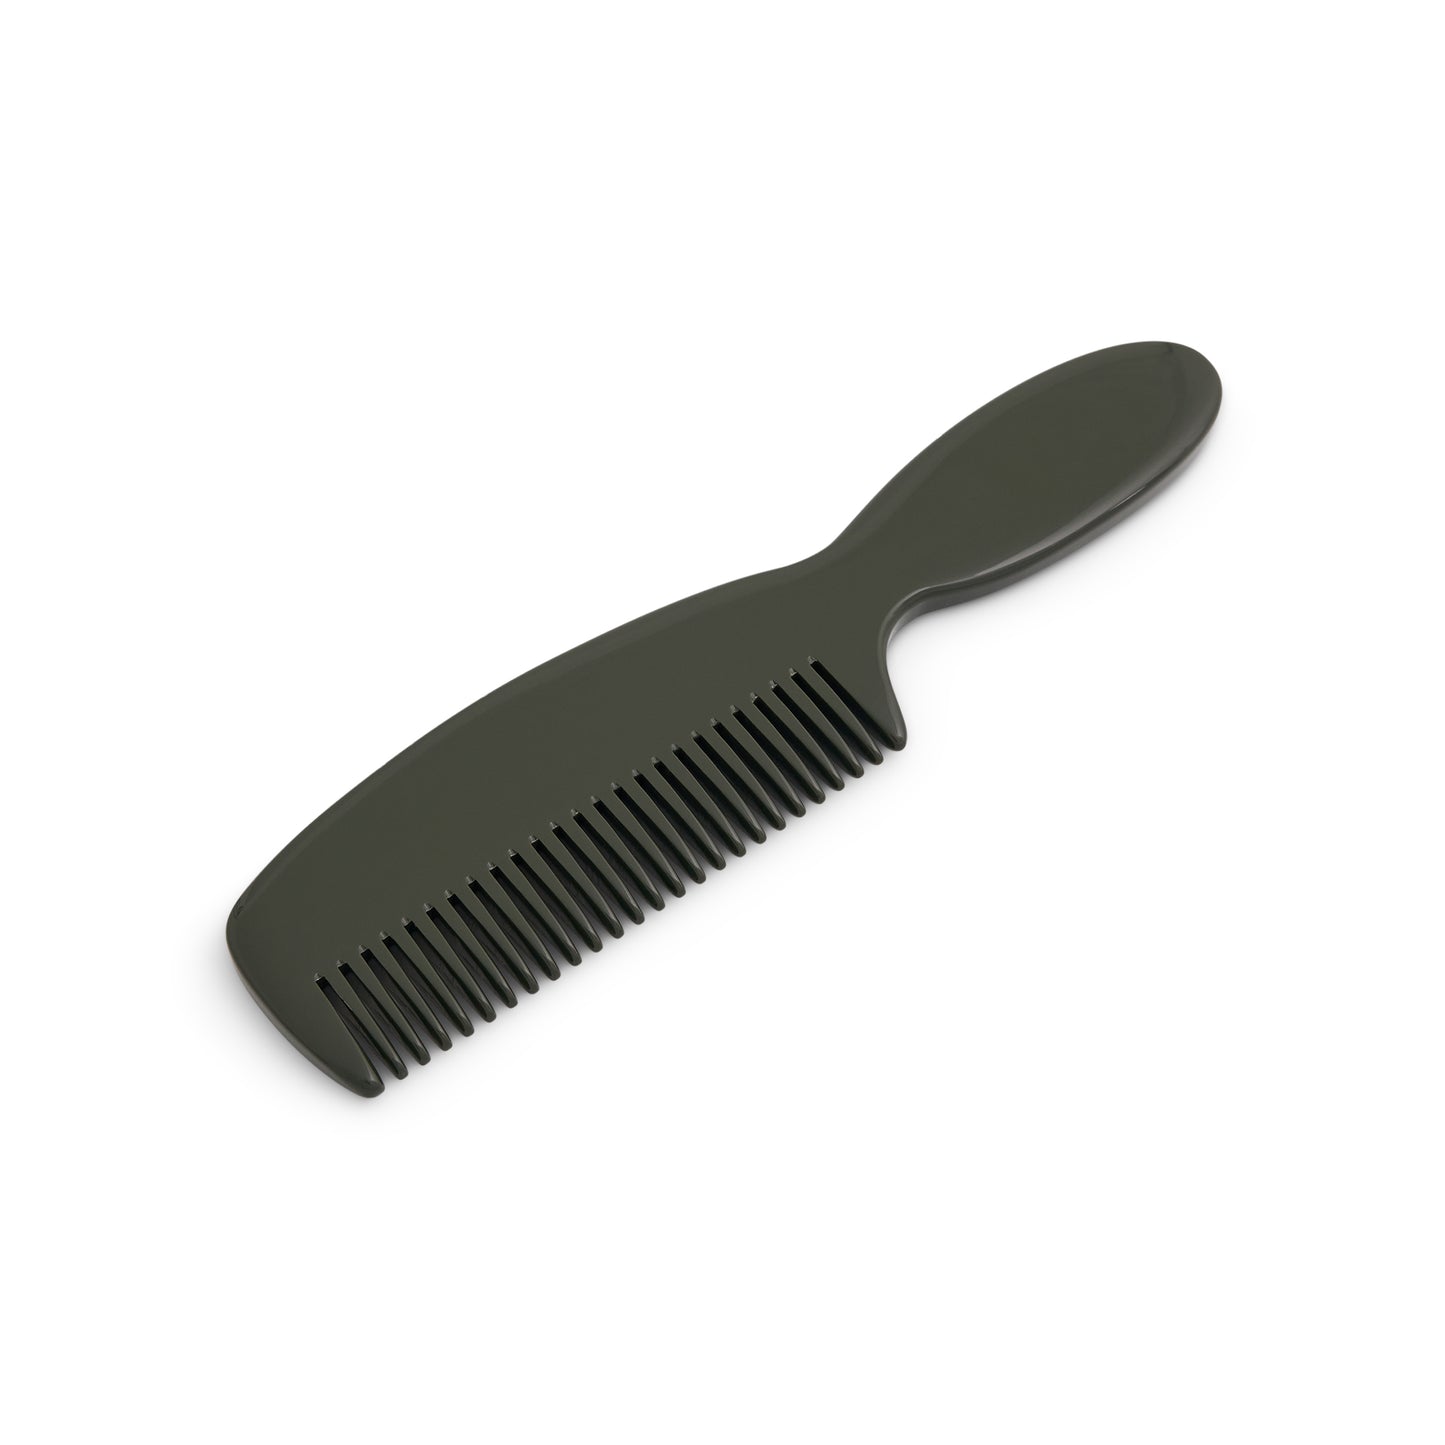 Bookish Hair Comb in Army Green